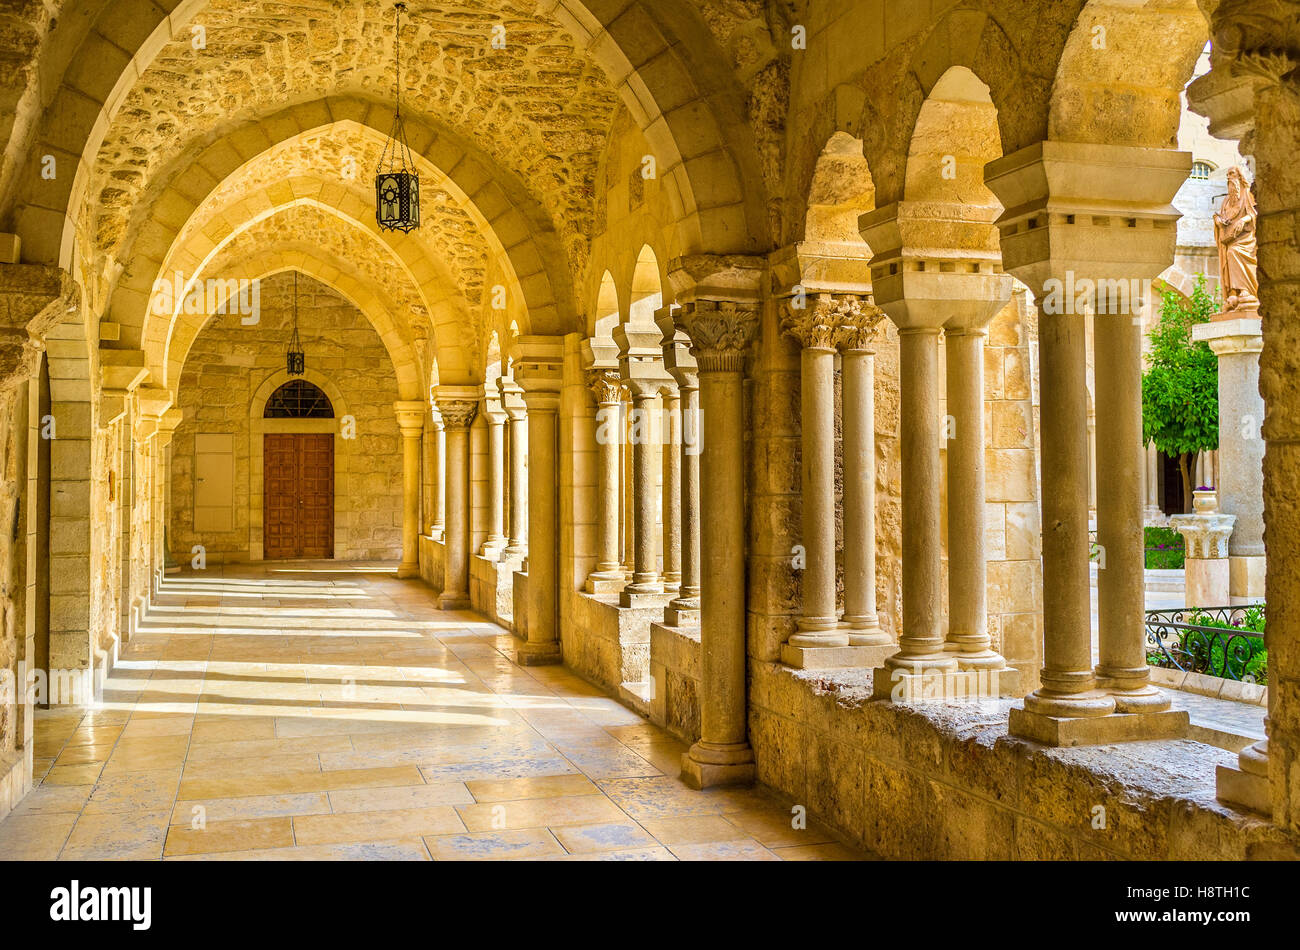 The inner courtyard of the Church of the Nativity is surrounded by beautiful covered terraces with stone columns Stock Photo